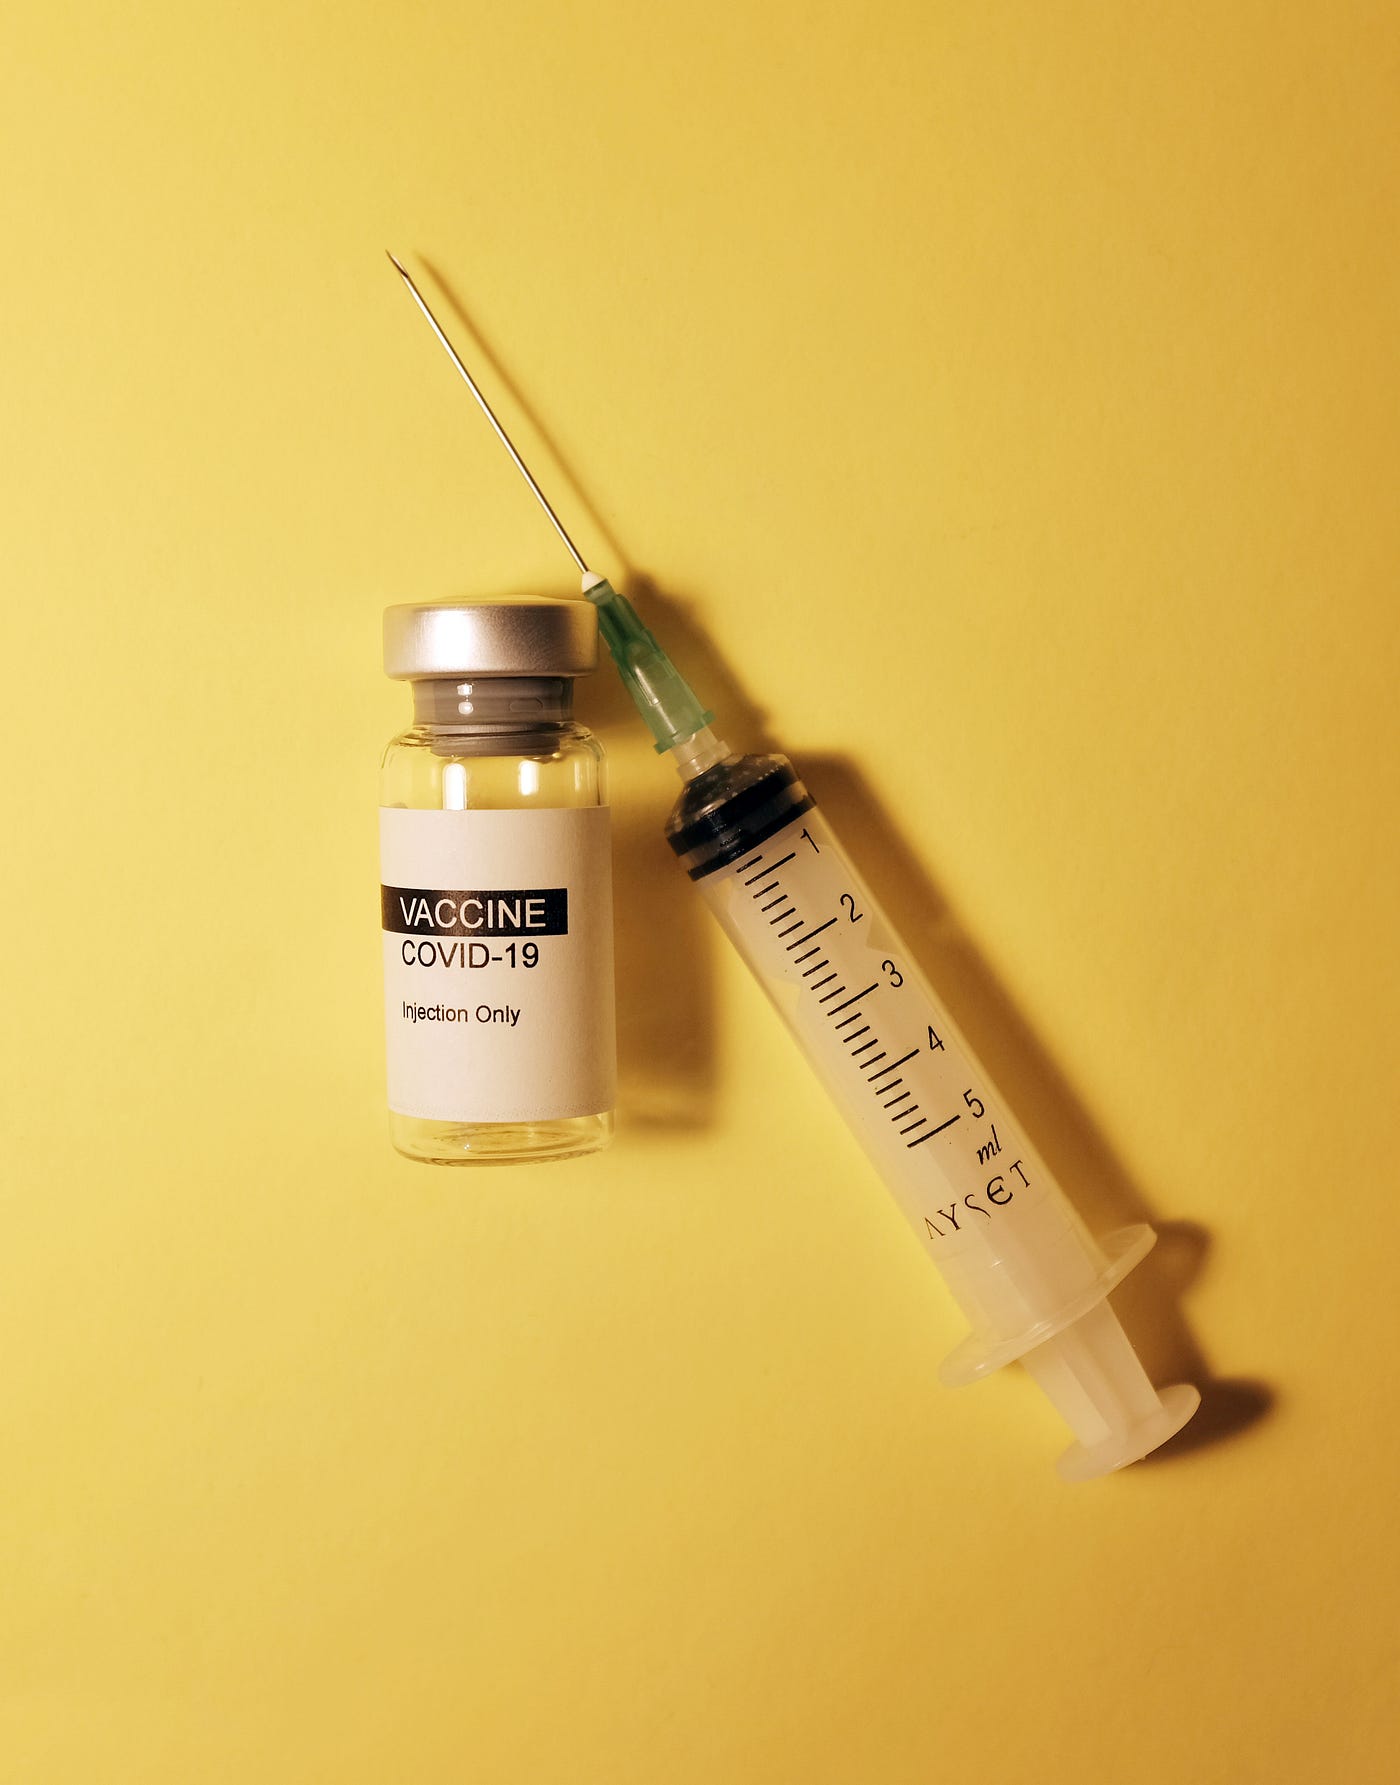 Covid vaccine vial on the left; empty syringe on the right. Yellow background.